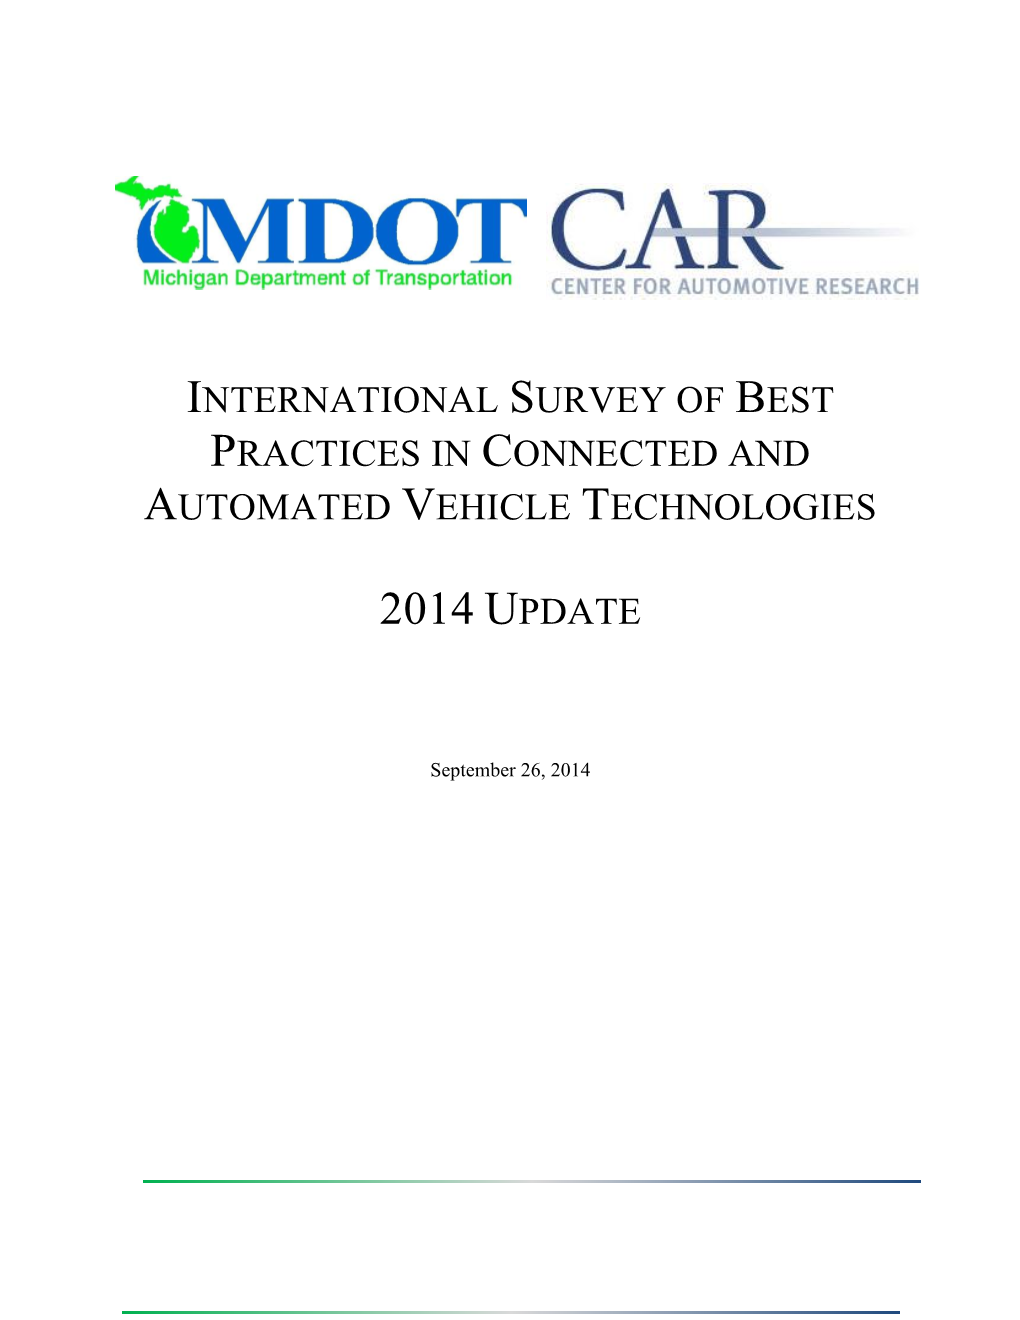 International Survey of Best Practices in Connected and Automated Vehicle Technologies